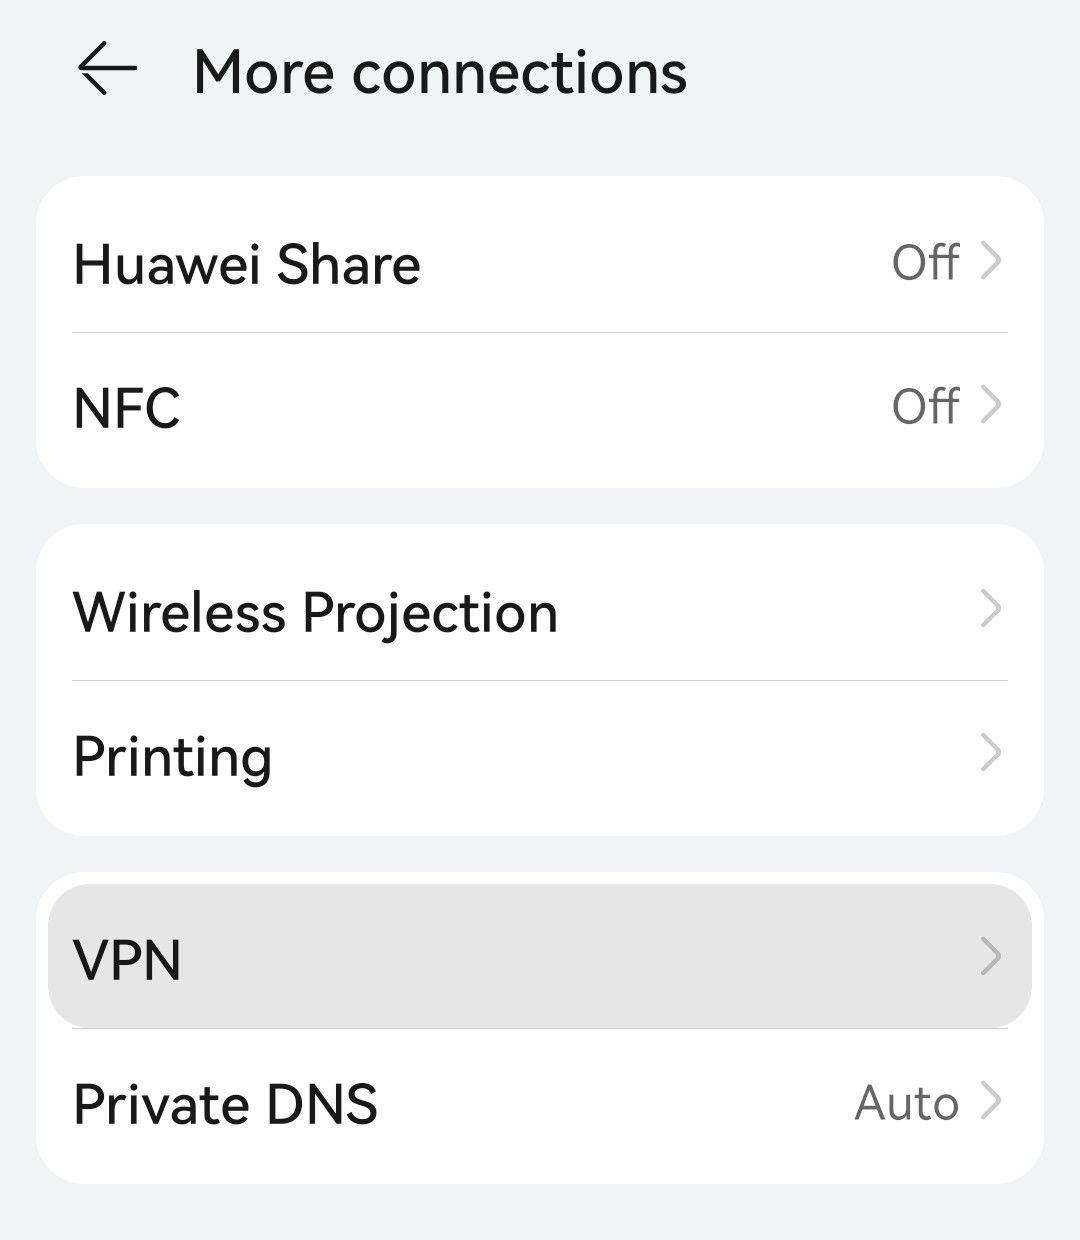 Android more connections, VPN options